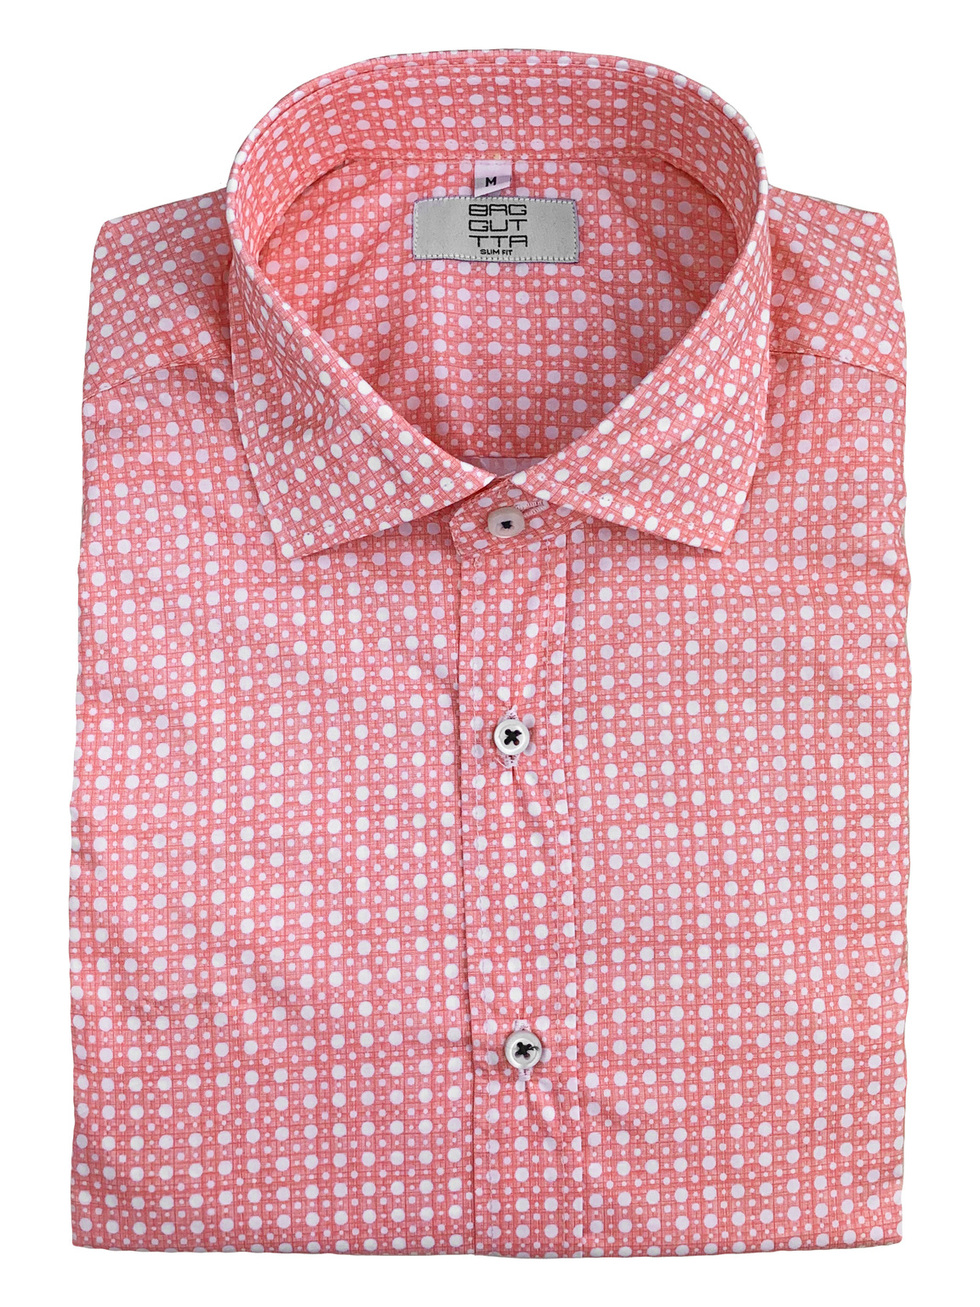 DUSTY PINK SPOTTED SHIRT